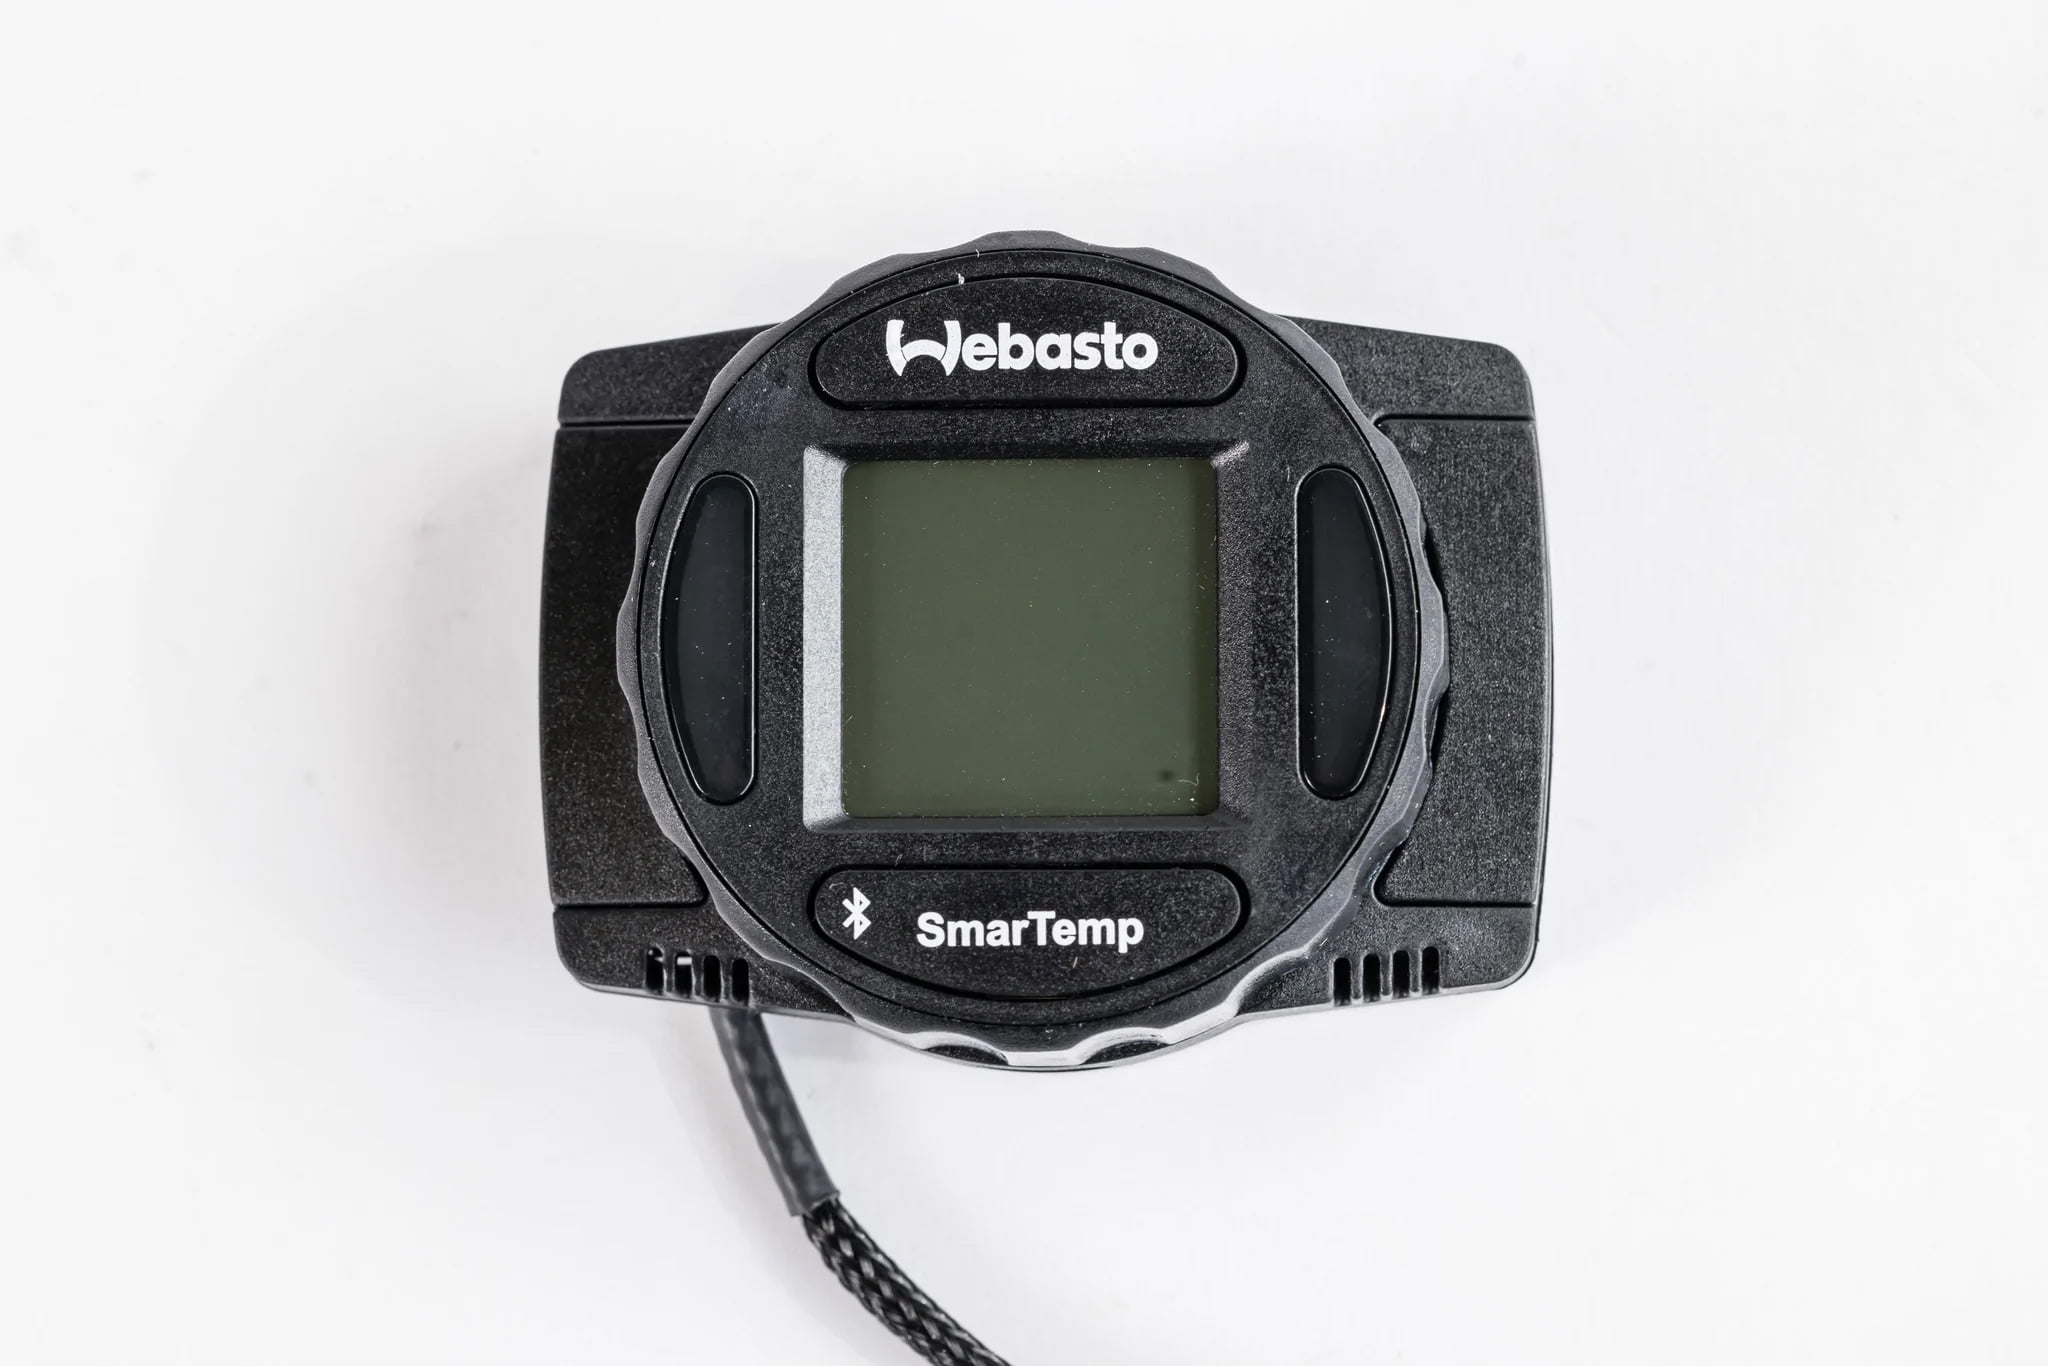 Standheizung Webasto Thermo Top EVO 4 Benzin Basis for sale online